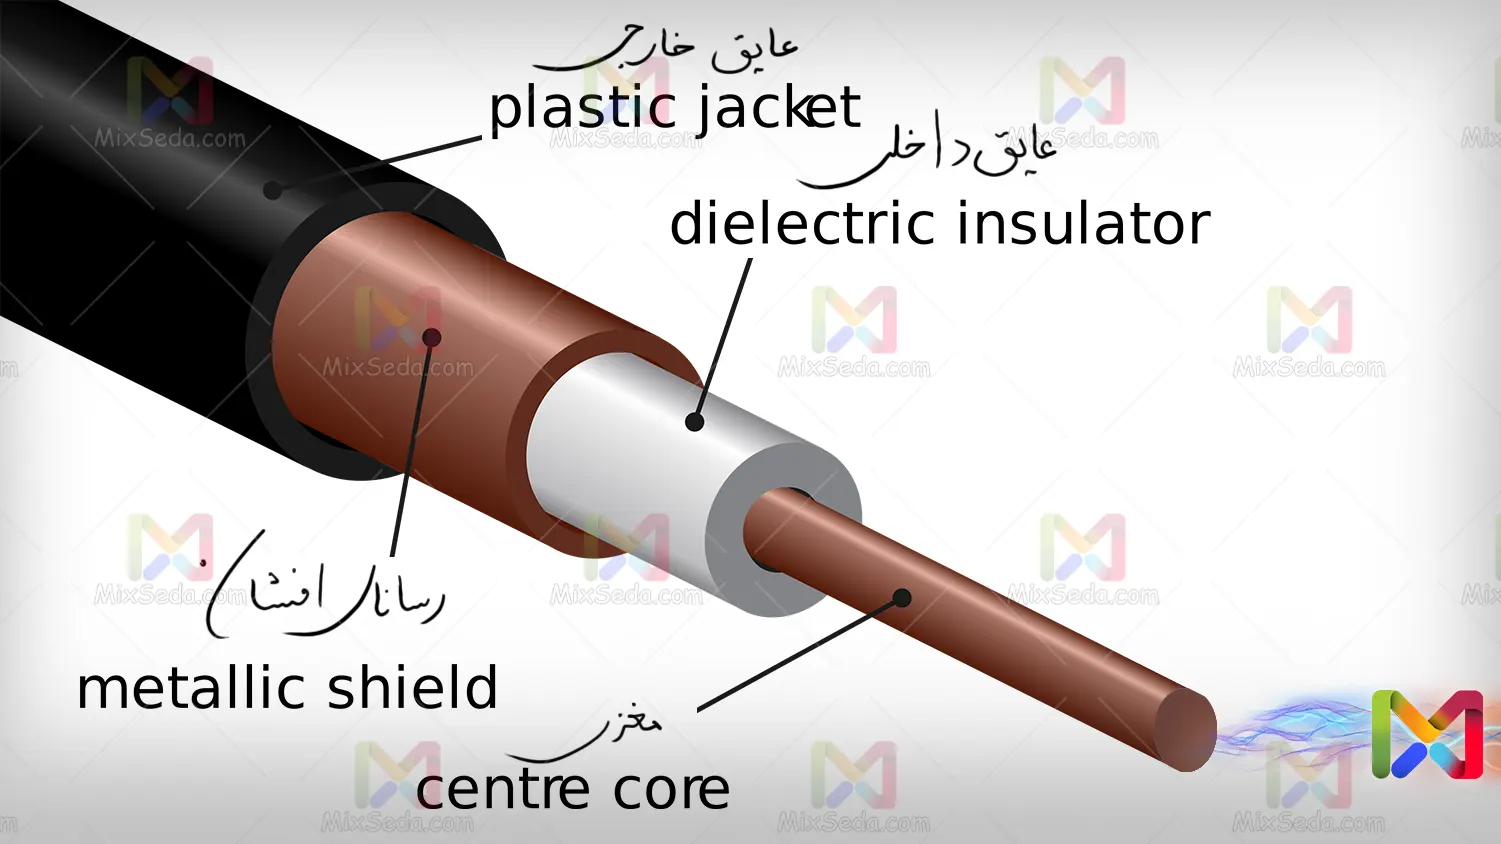 Coaxial cable components